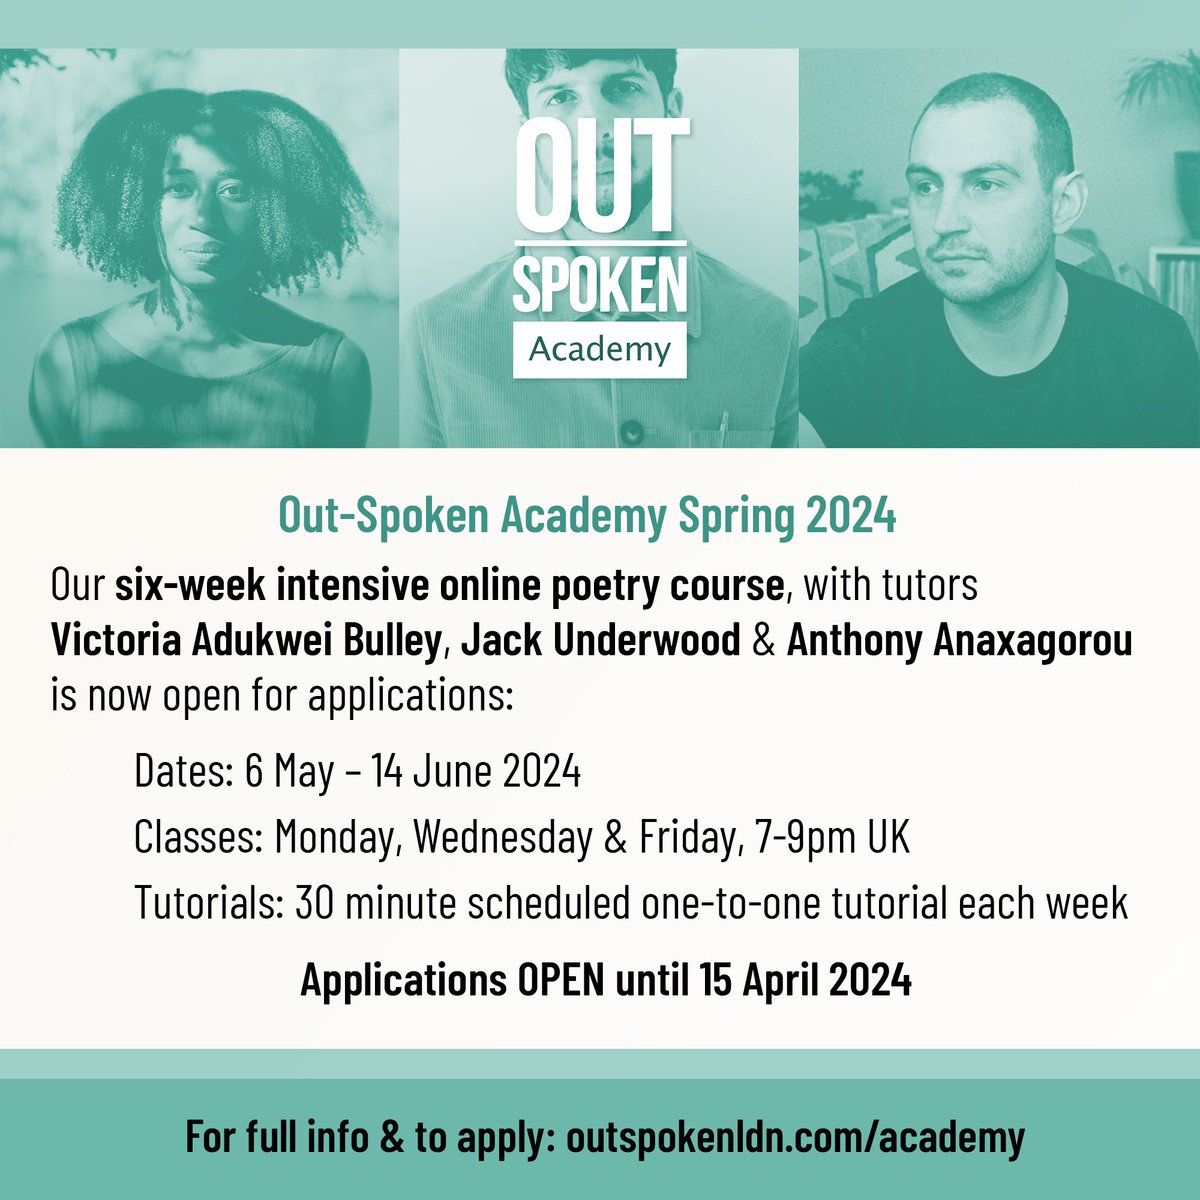 Delighted to announce the tutors for our next Academy course — join us online this May for 6 weeks of intensive poetry with: > @victoriaadukwei > Jack Underwood > @Anthony1983 Applications OPEN to 15 April Read more & apply: outspokenldn.com/academy